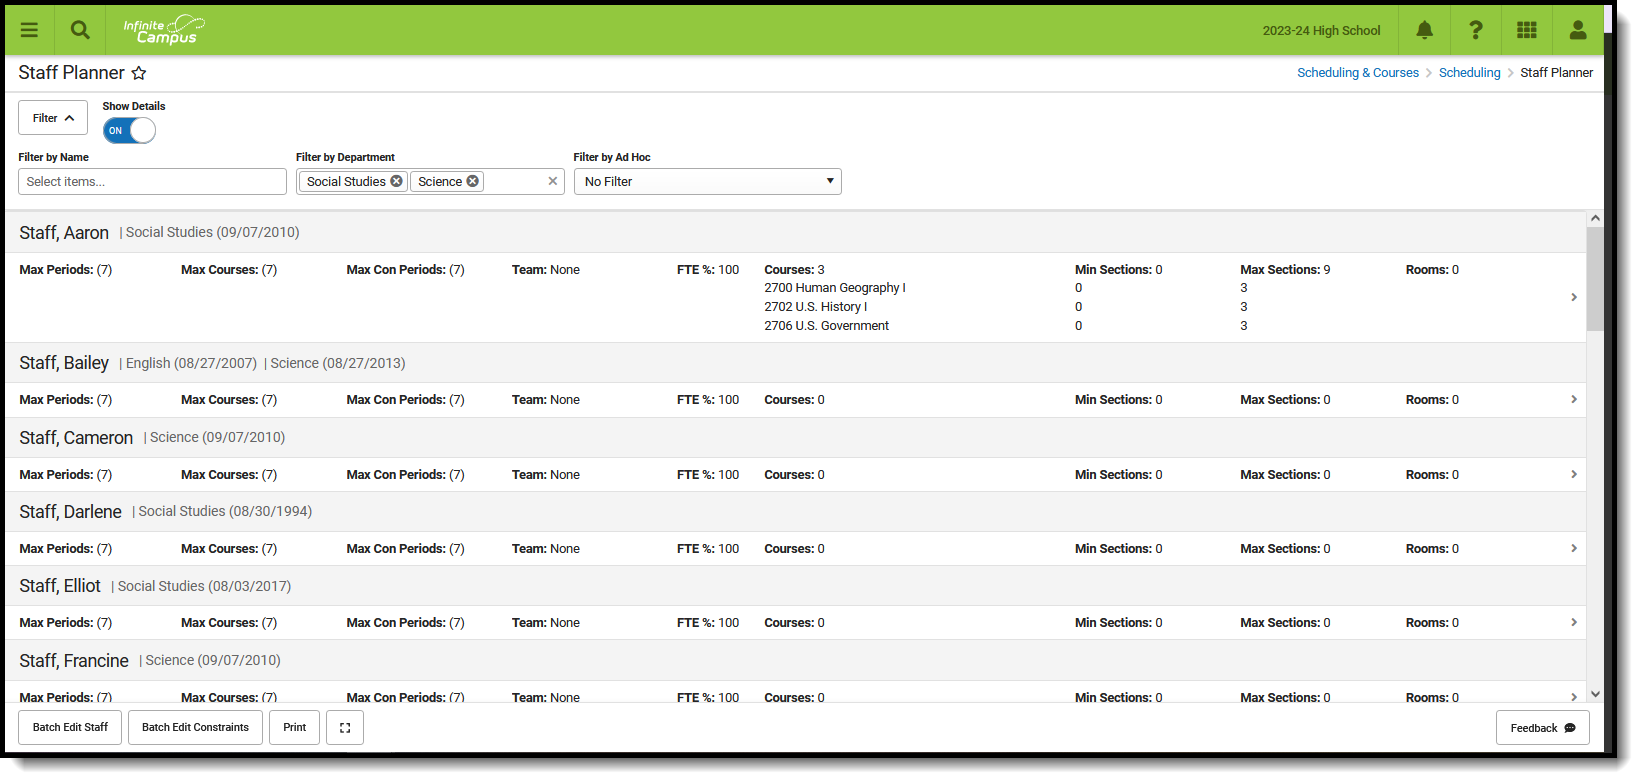 Screenshot of the Staff Planner located at Scheduling and Courses, Scheduling.